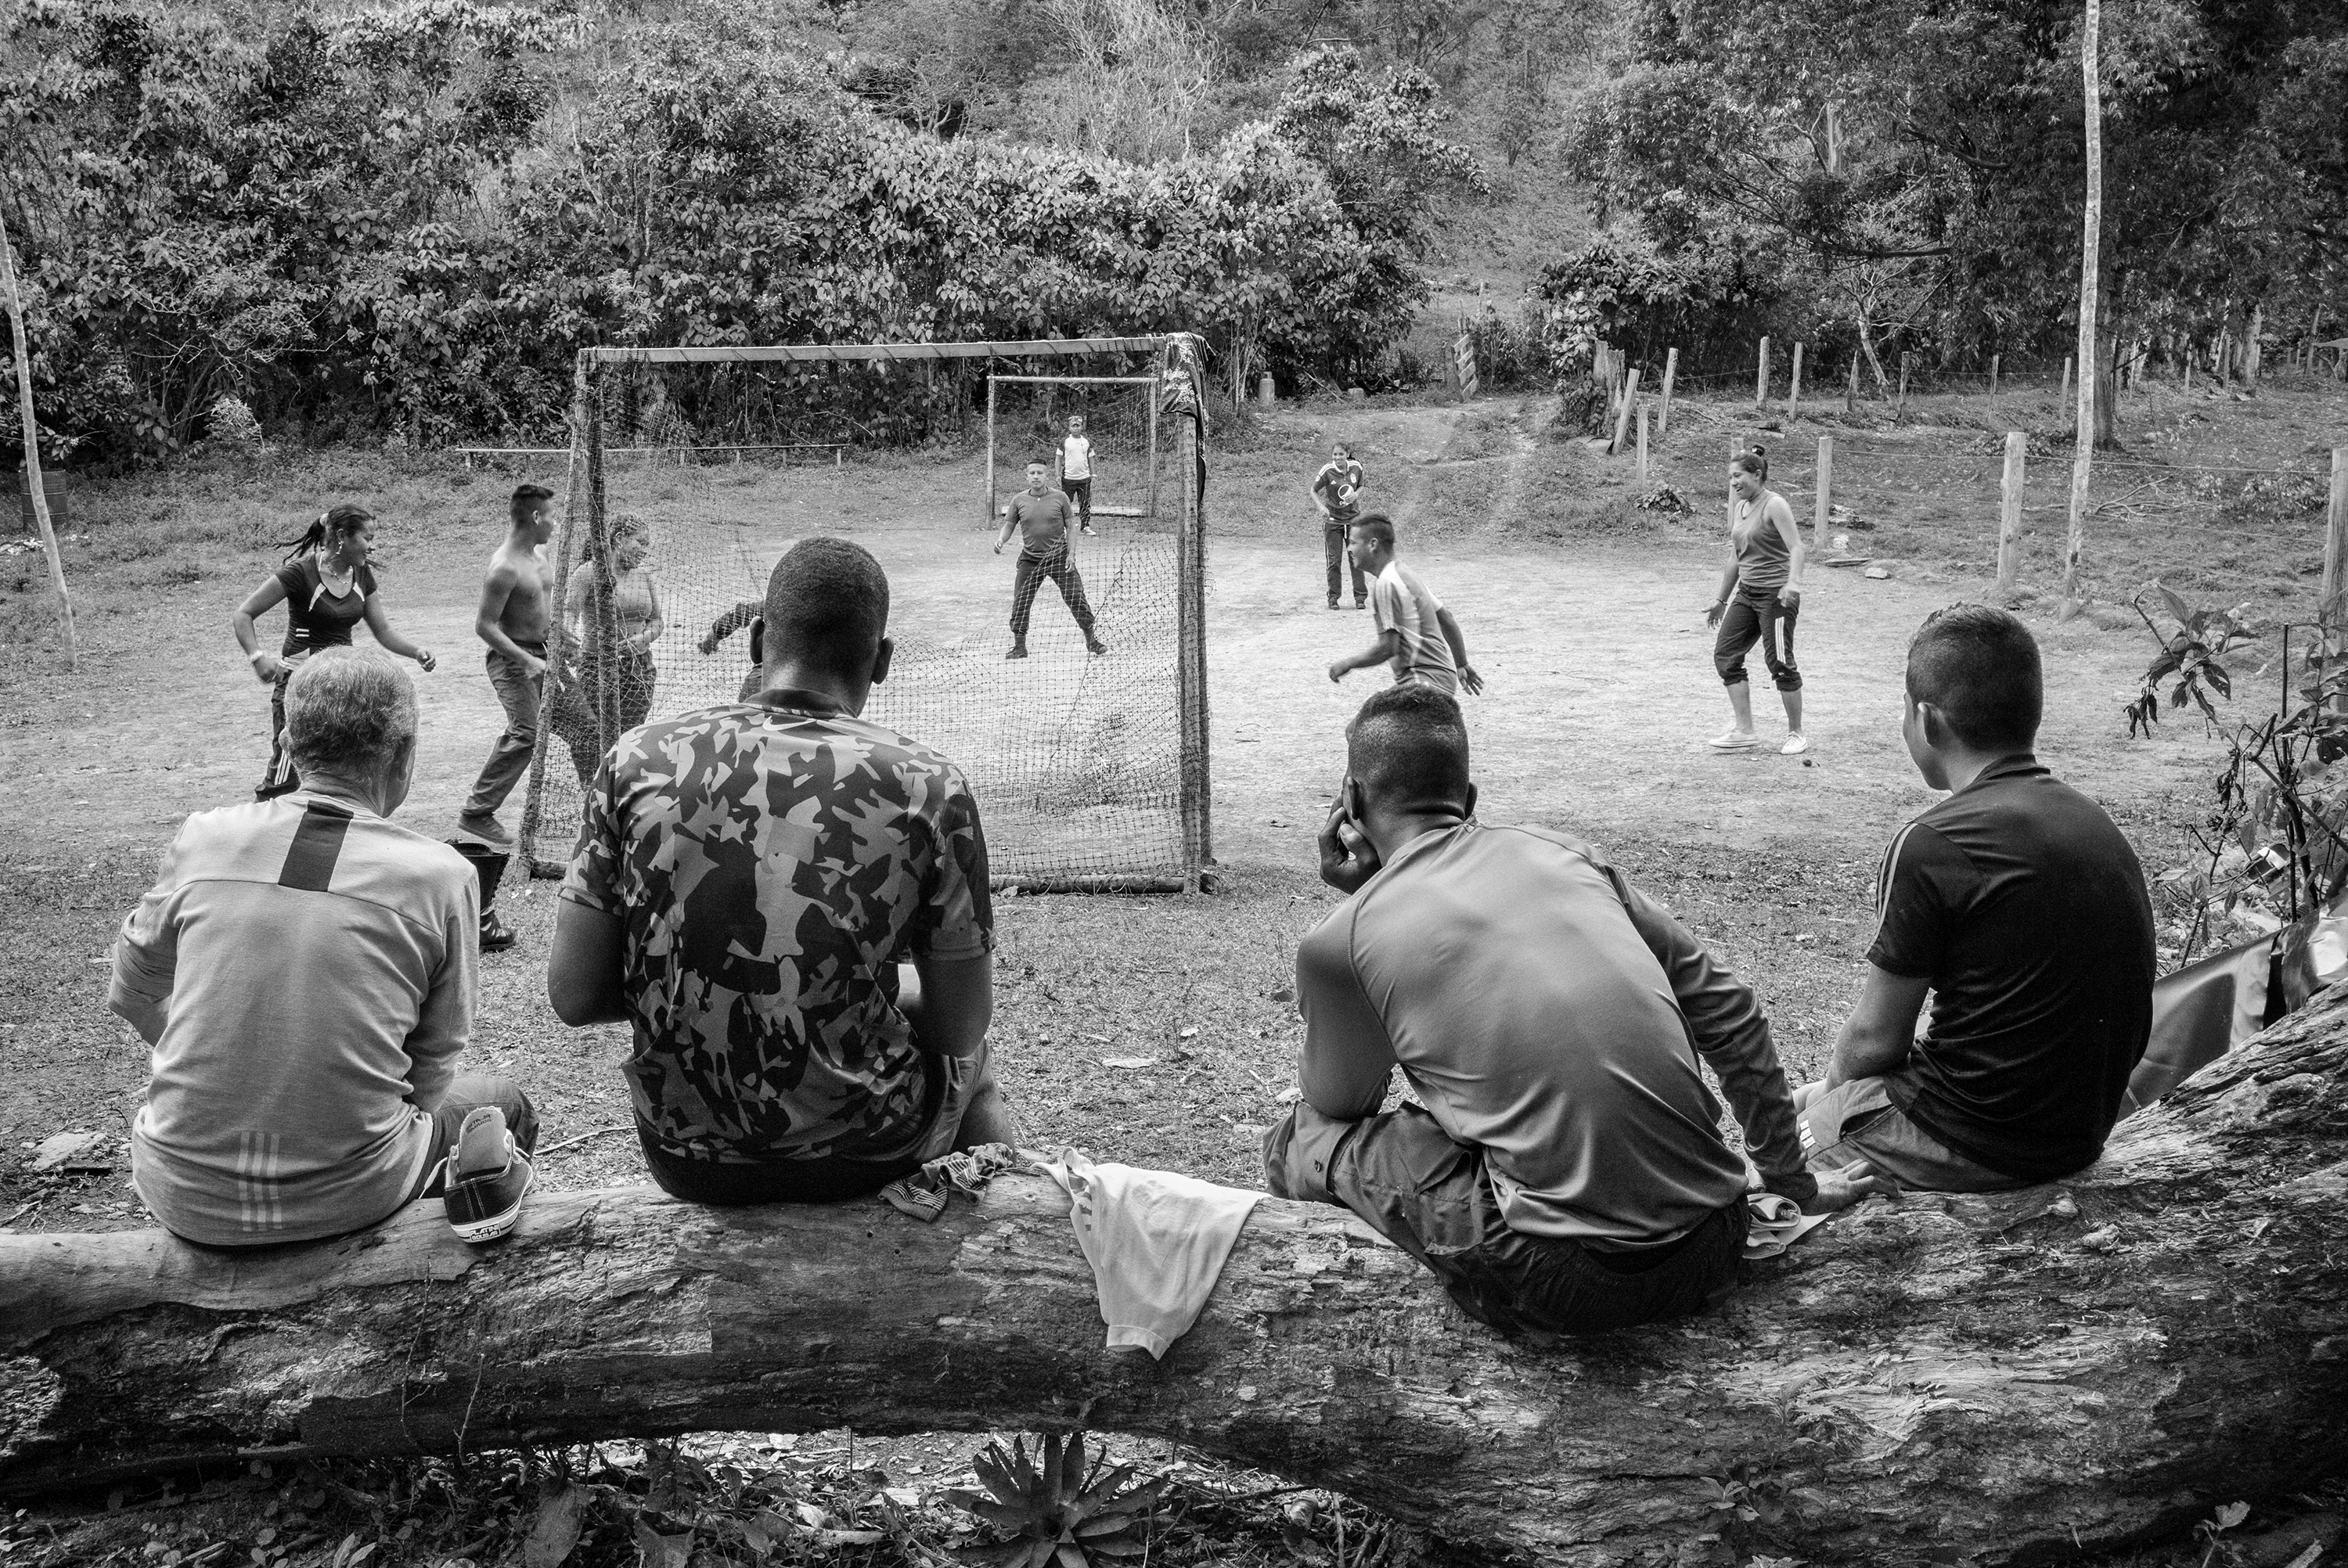 FARC guerrilla members play soccer at a camp in Cauca, Colombia, July 2016.  Under the peace agreement signed in Havana on Aug. 24, 2016, ending Colombia's 52-year conflict, FARC fighters will receive amnesty for past crimes including drug trafficking.